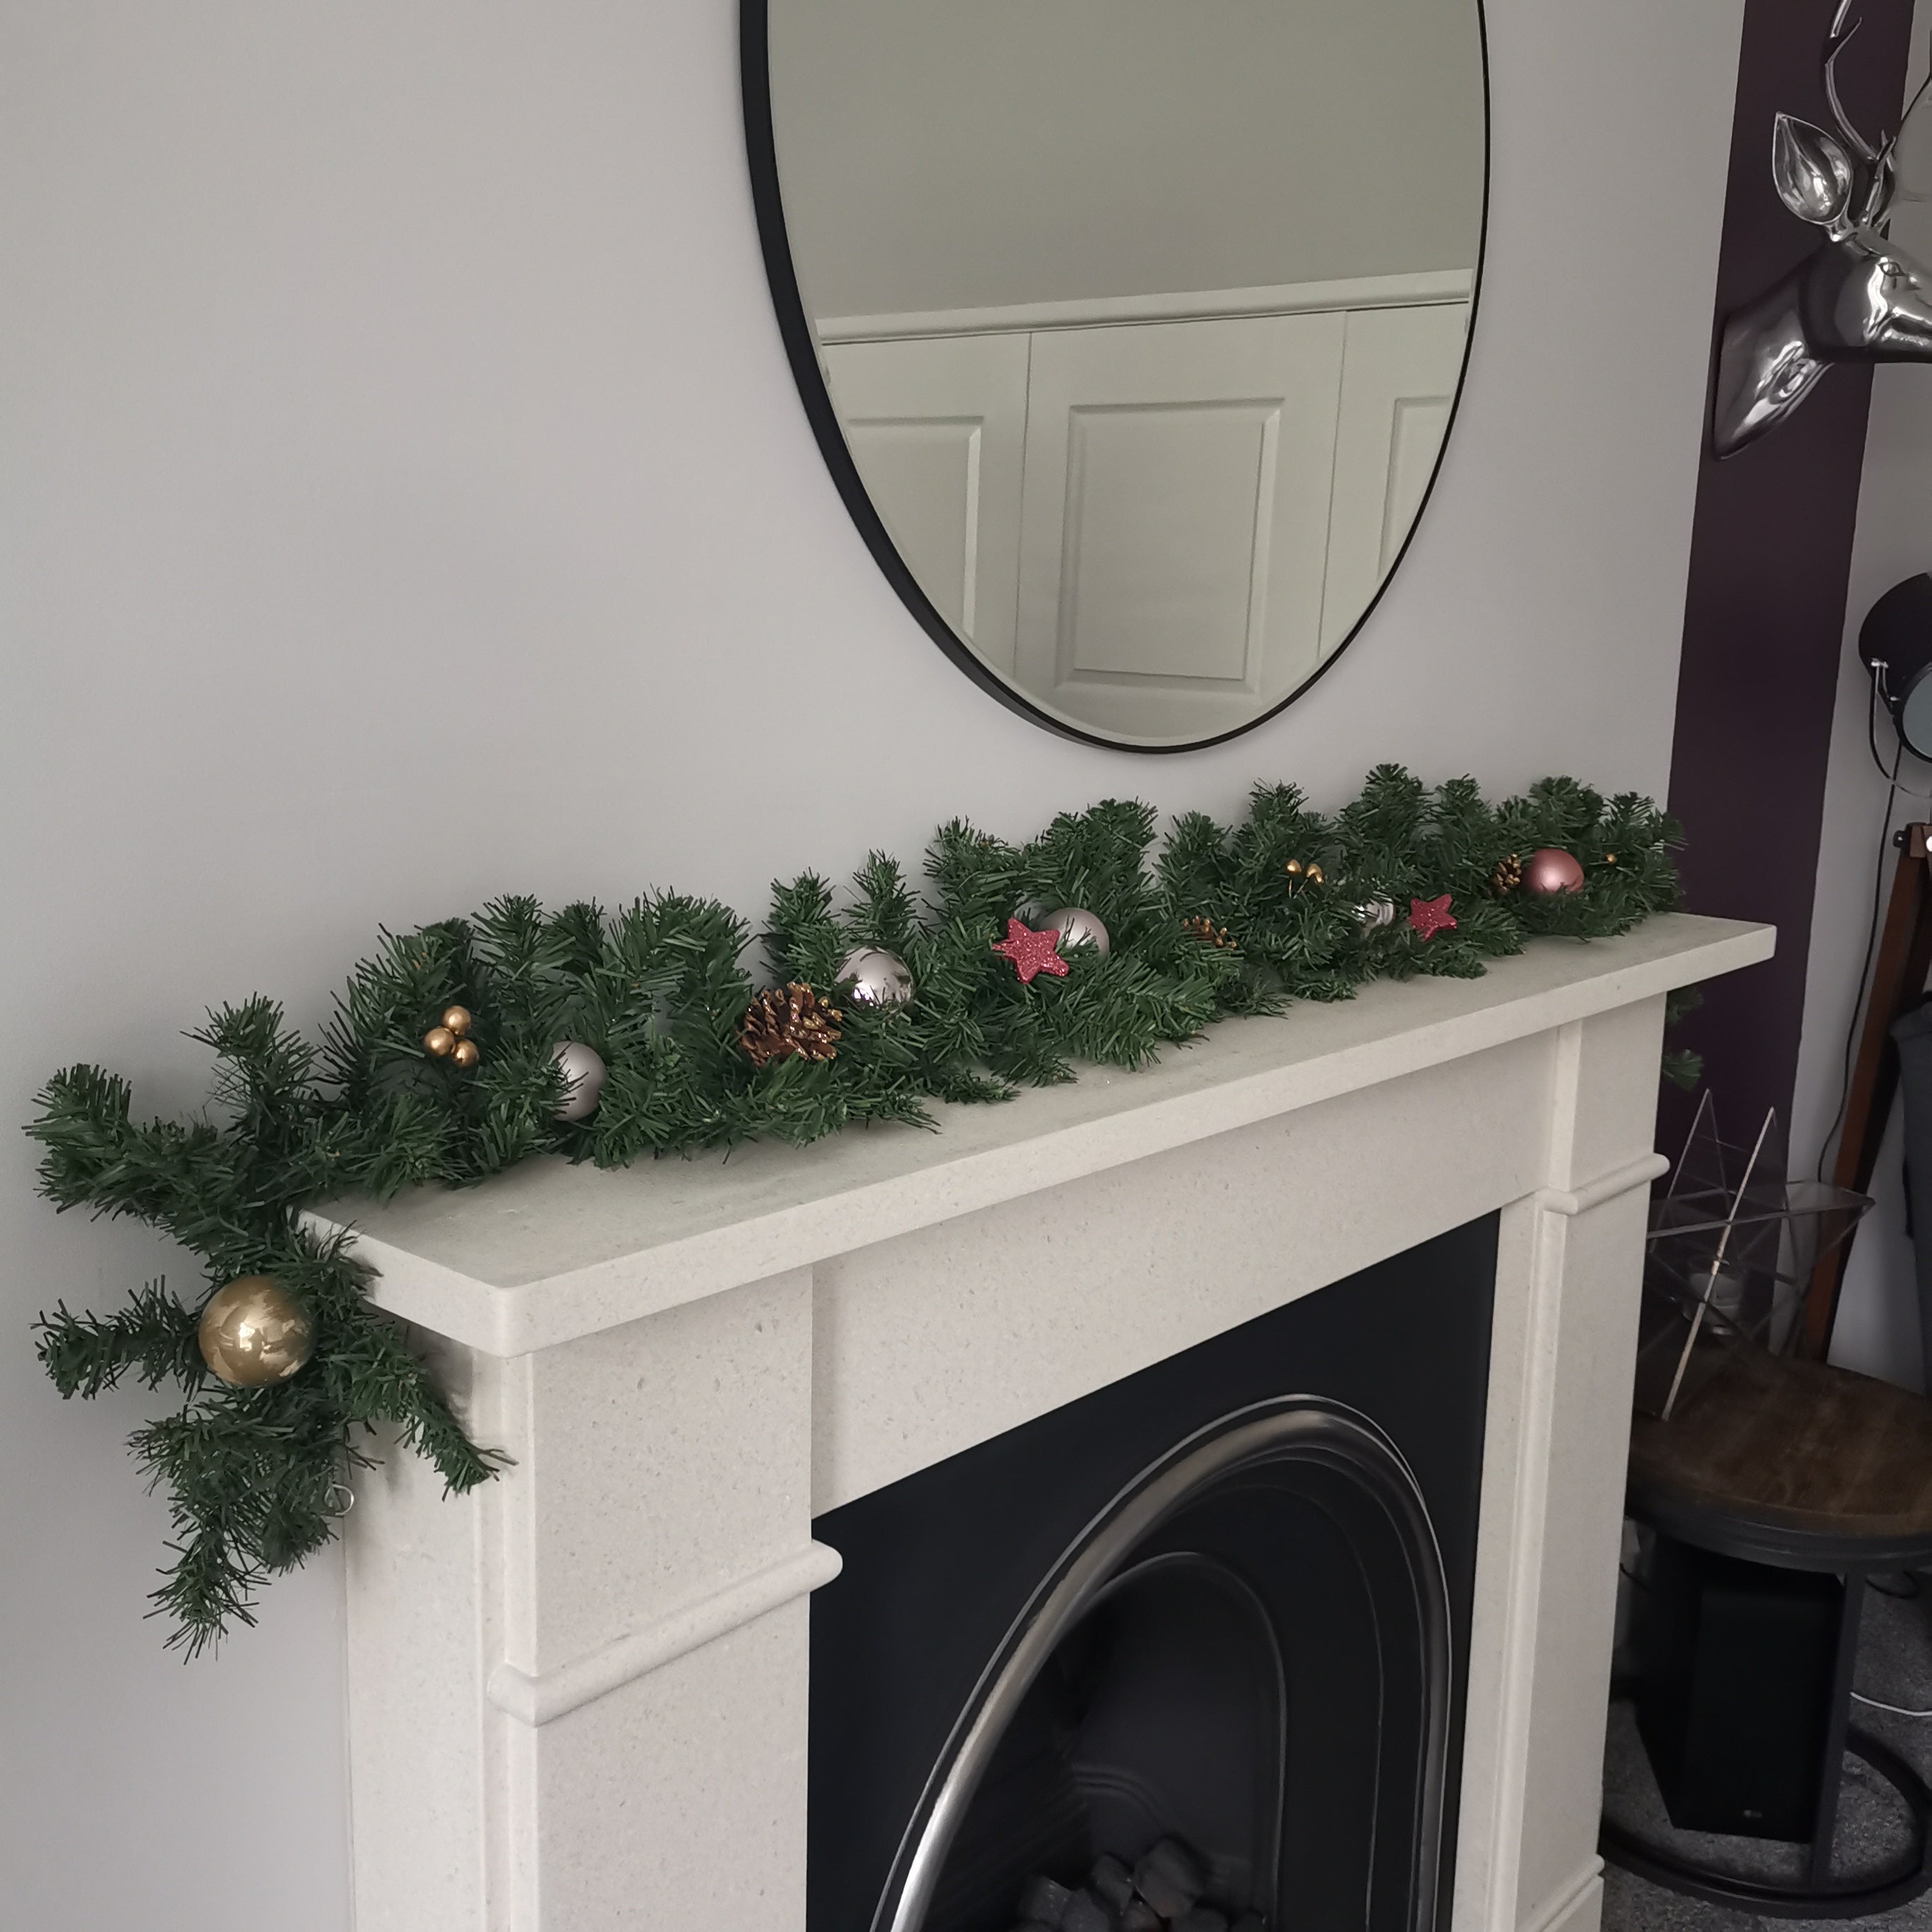 180cm Festive Christmas Garland With Pine Cones And Glitter Pink And Gold Baubles